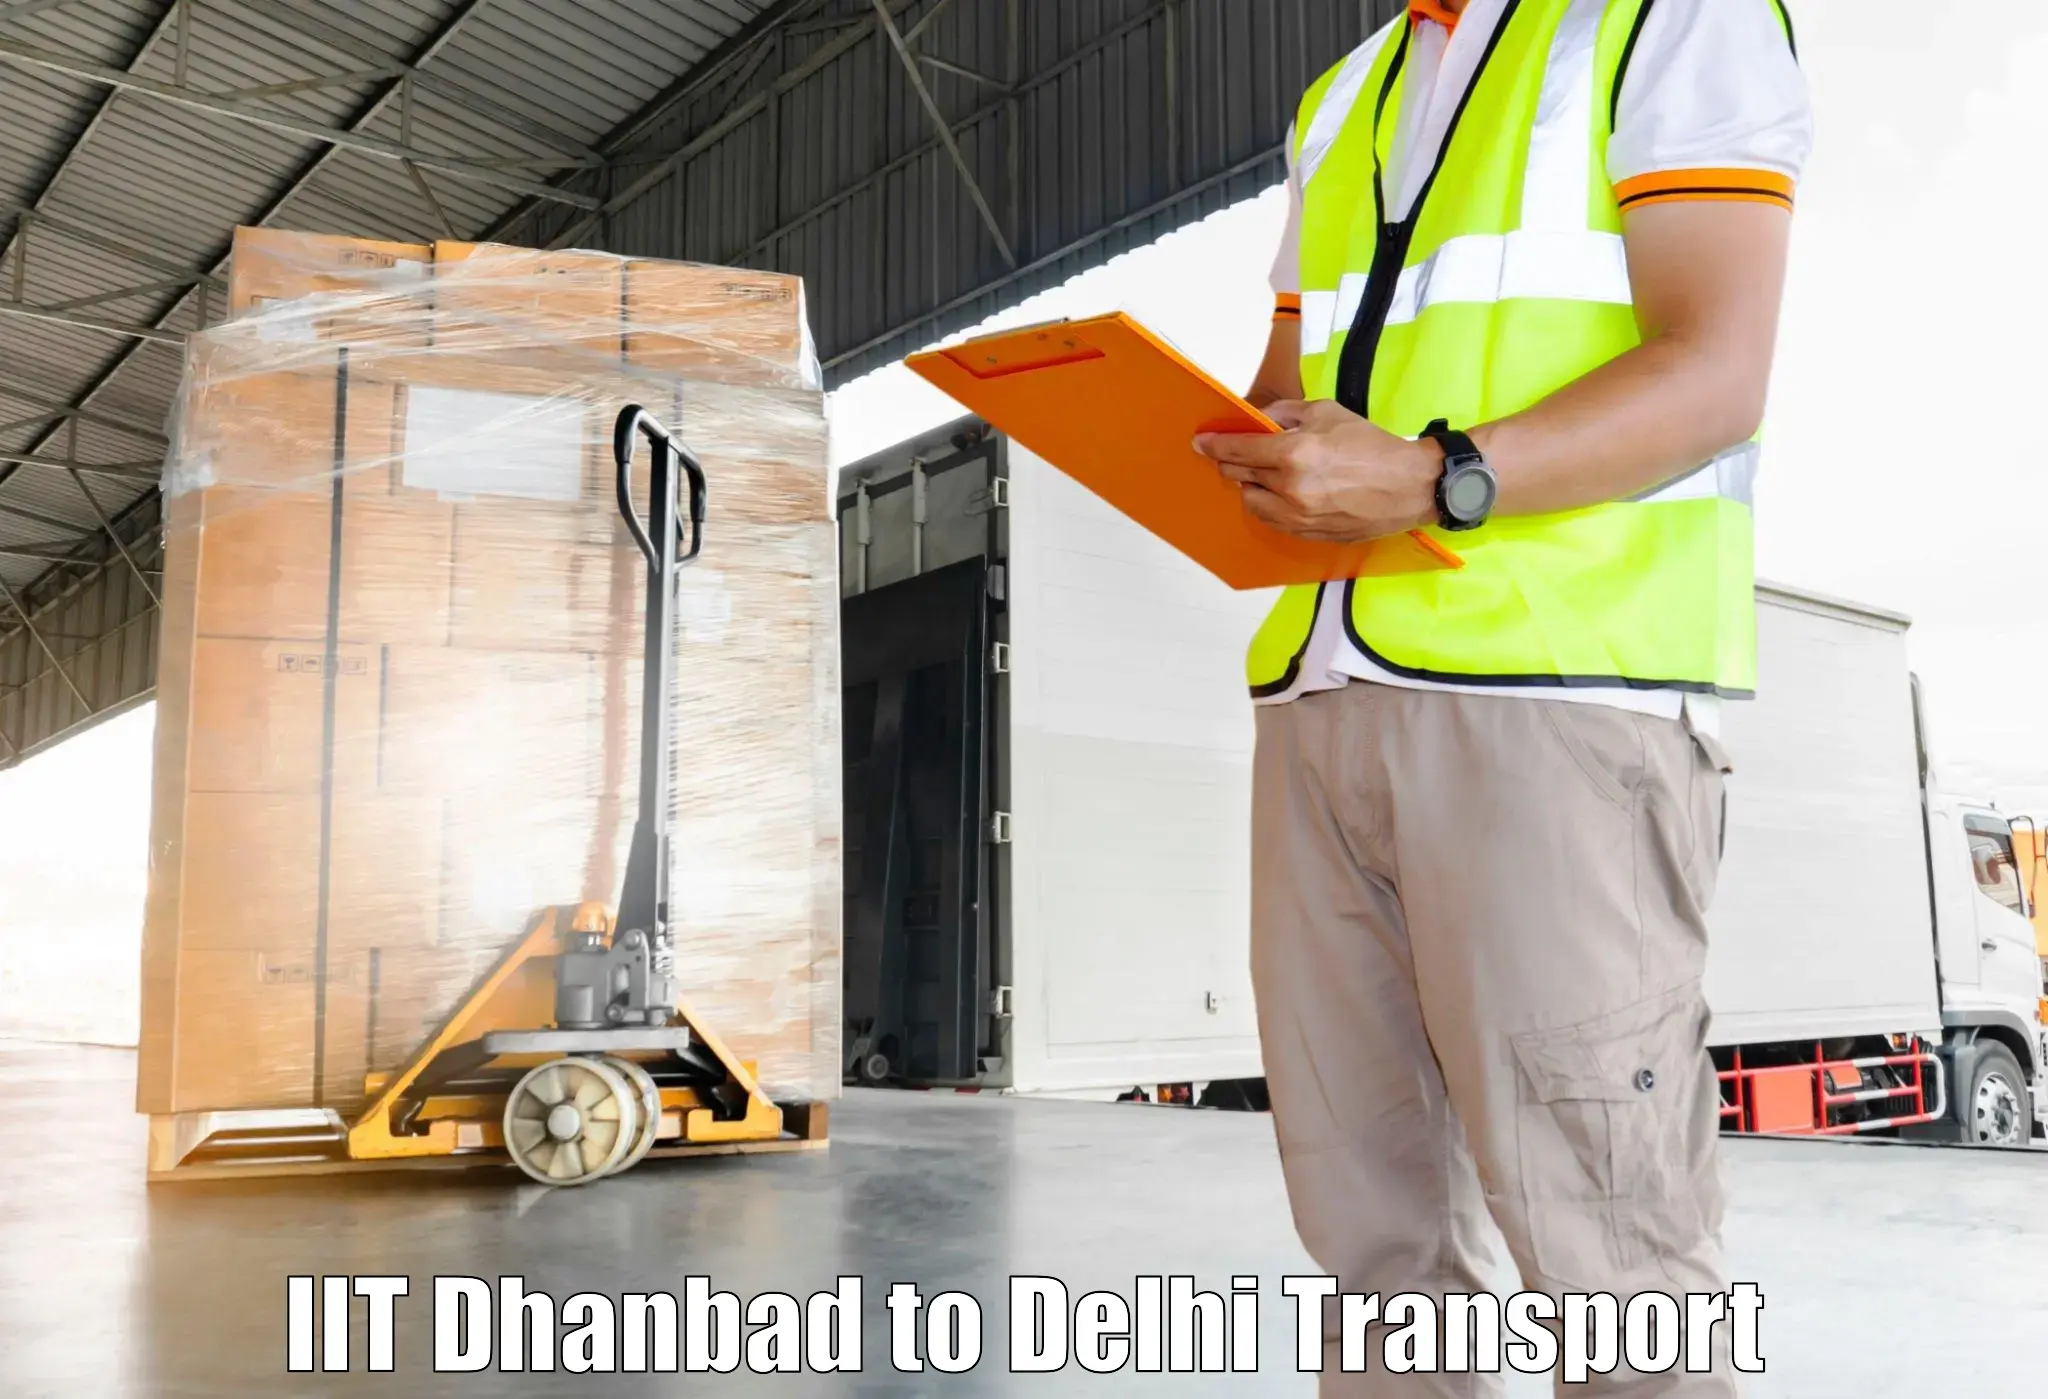 Express transport services IIT Dhanbad to University of Delhi